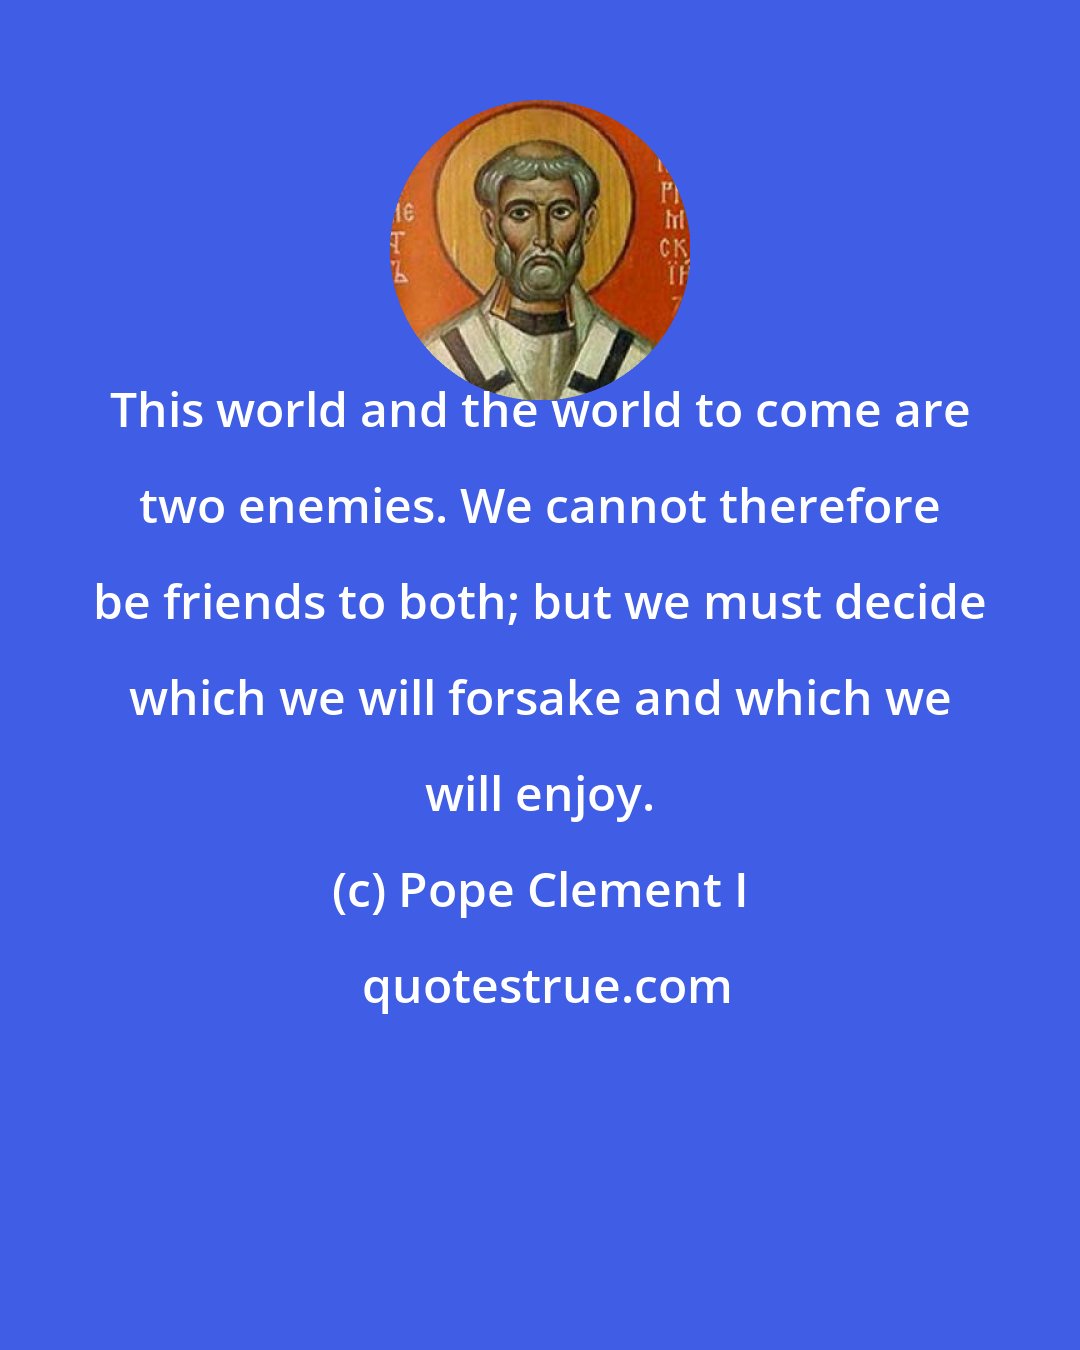 Pope Clement I: This world and the world to come are two enemies. We cannot therefore be friends to both; but we must decide which we will forsake and which we will enjoy.